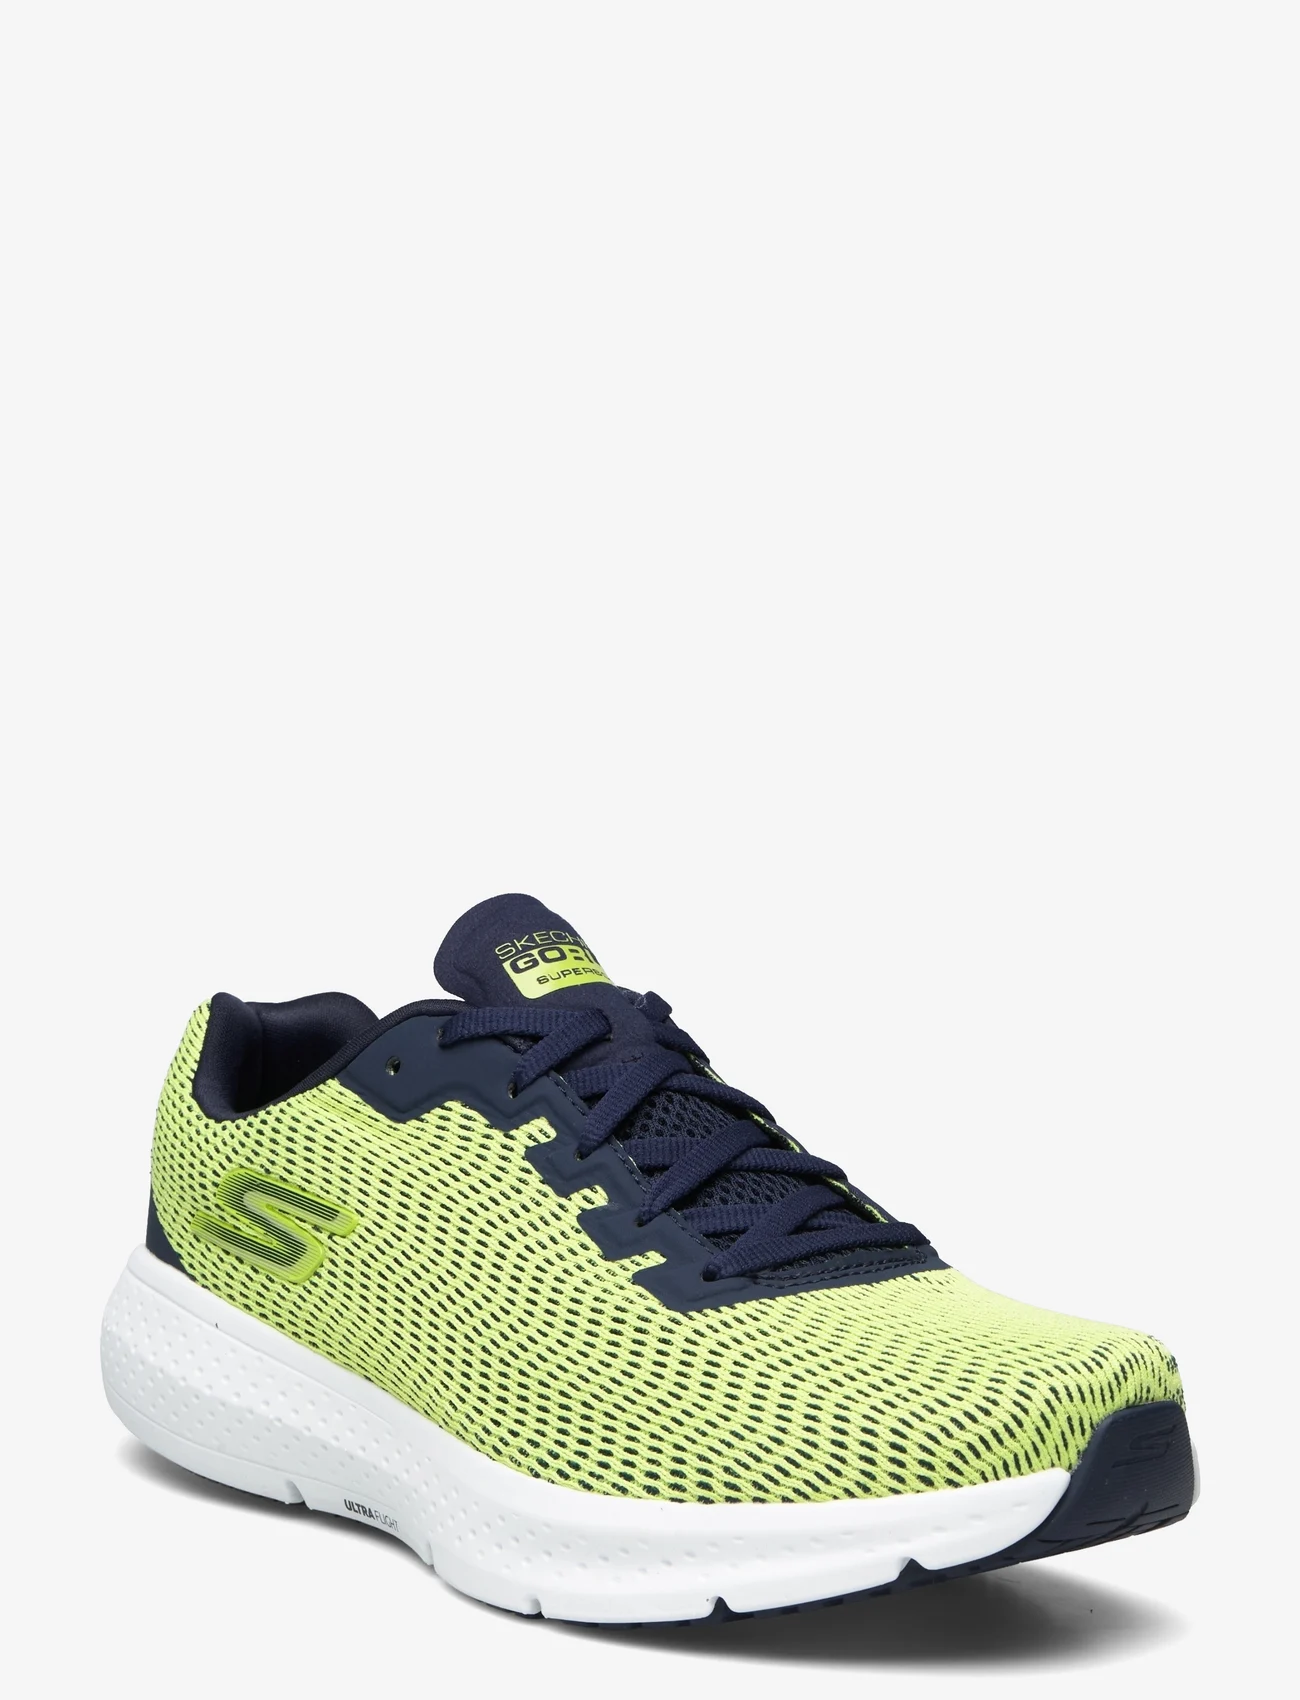 Skechers - Mens Go Run Supersonic  - Relaxed Fit - running shoes - ylnv yellow navy - 0